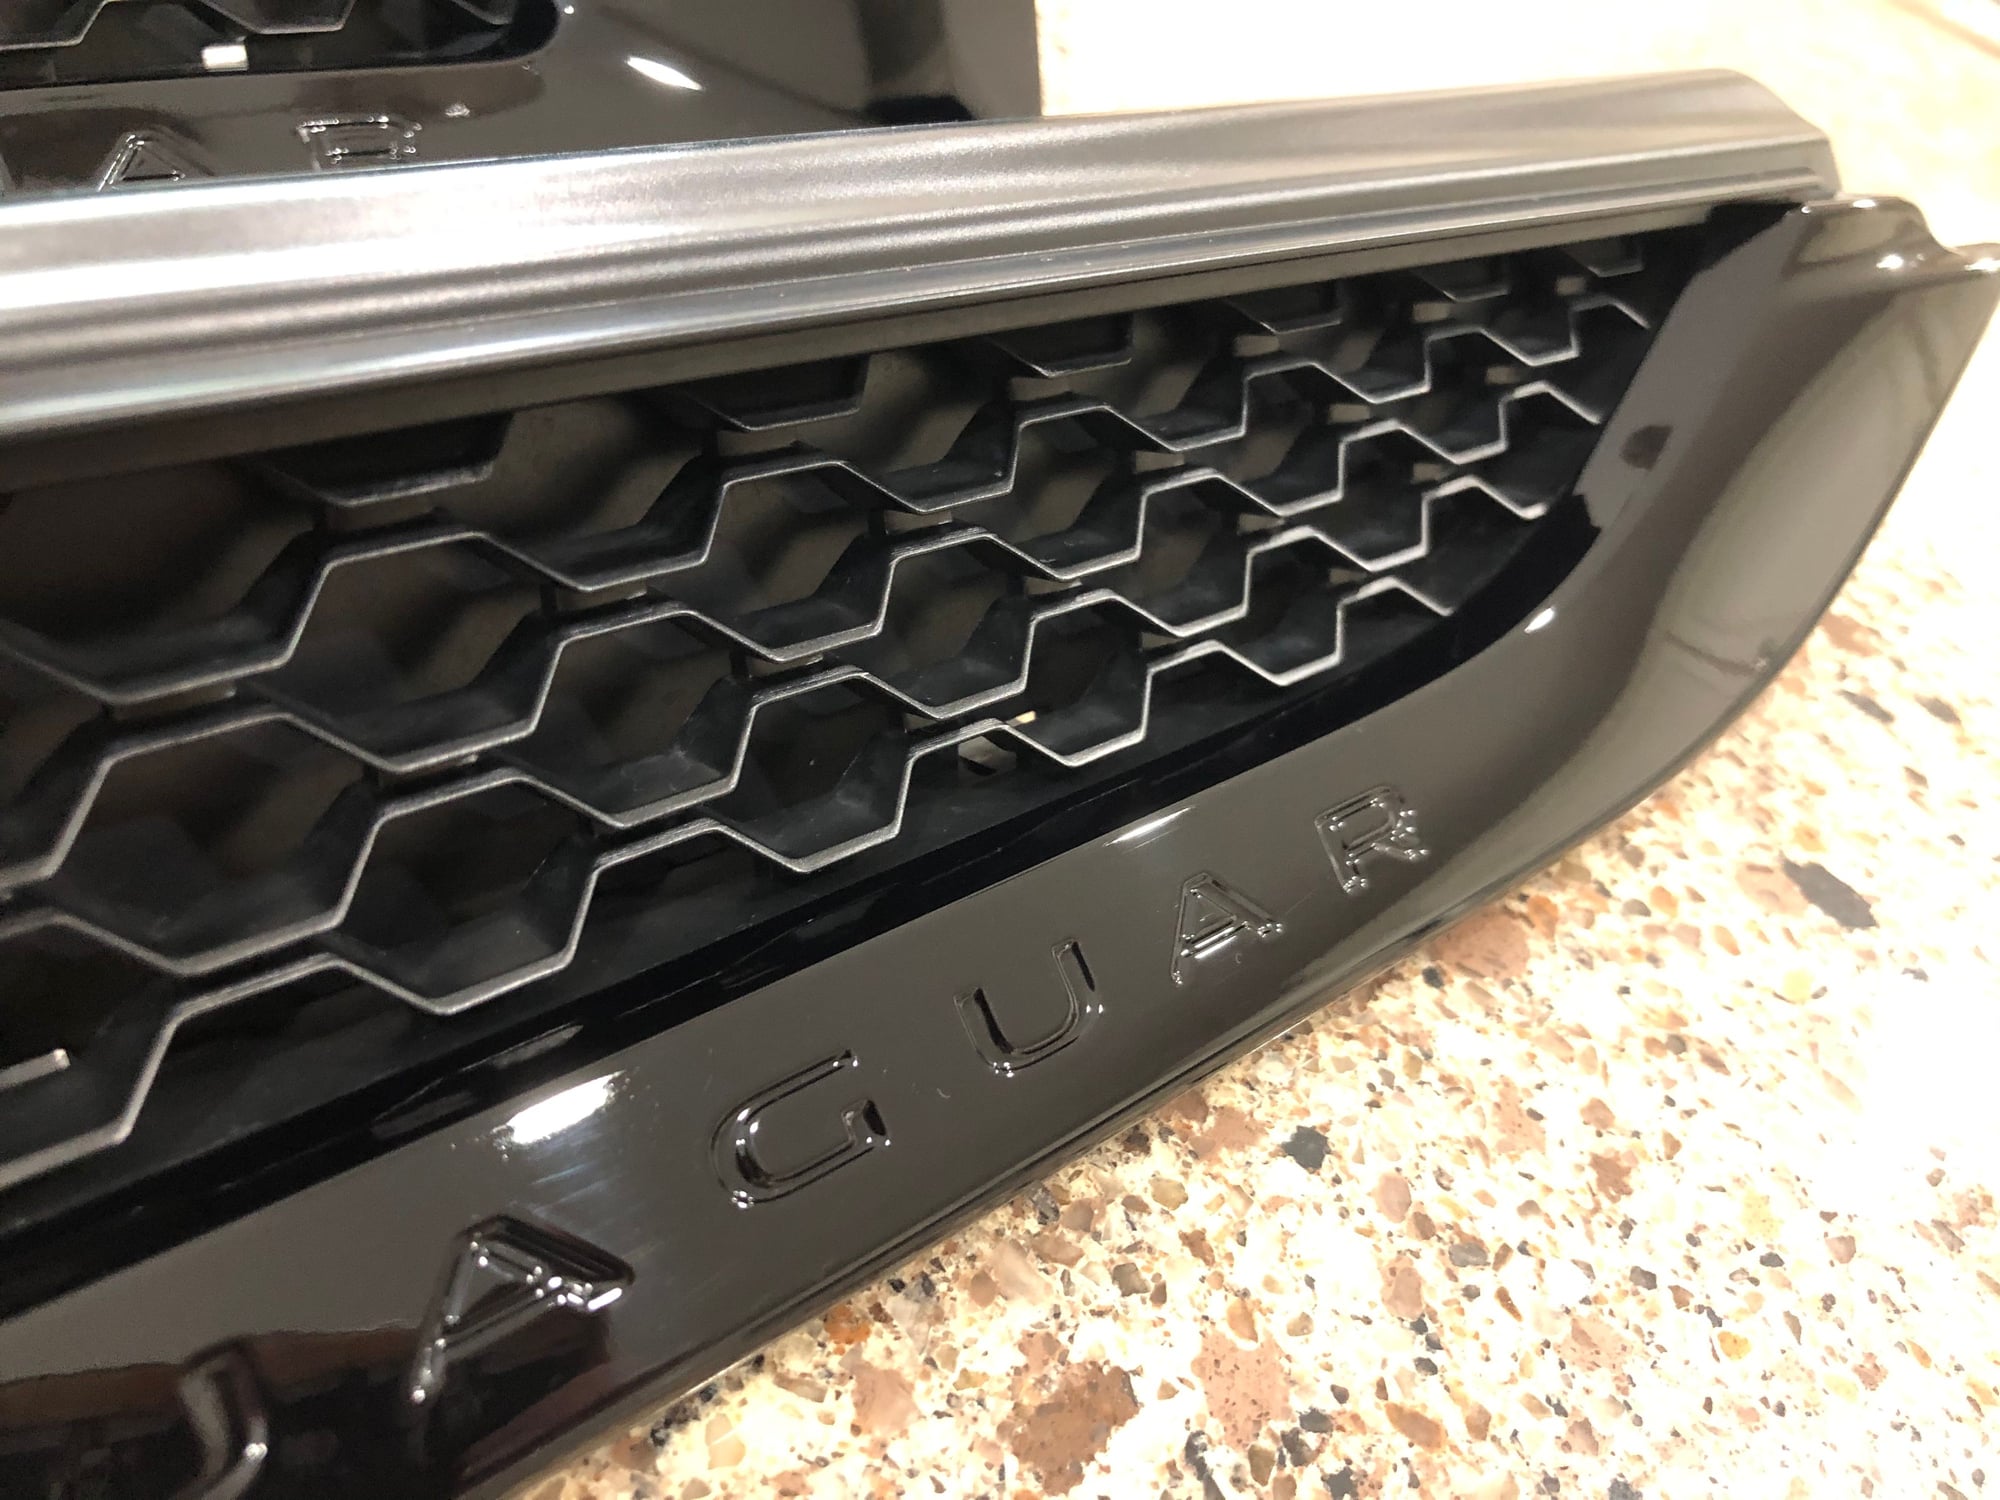 Accessories - F-type Gloss Black Power Vents Complete set - 1 pair Free Shipping - Used - Fishers, IN 46037, United States